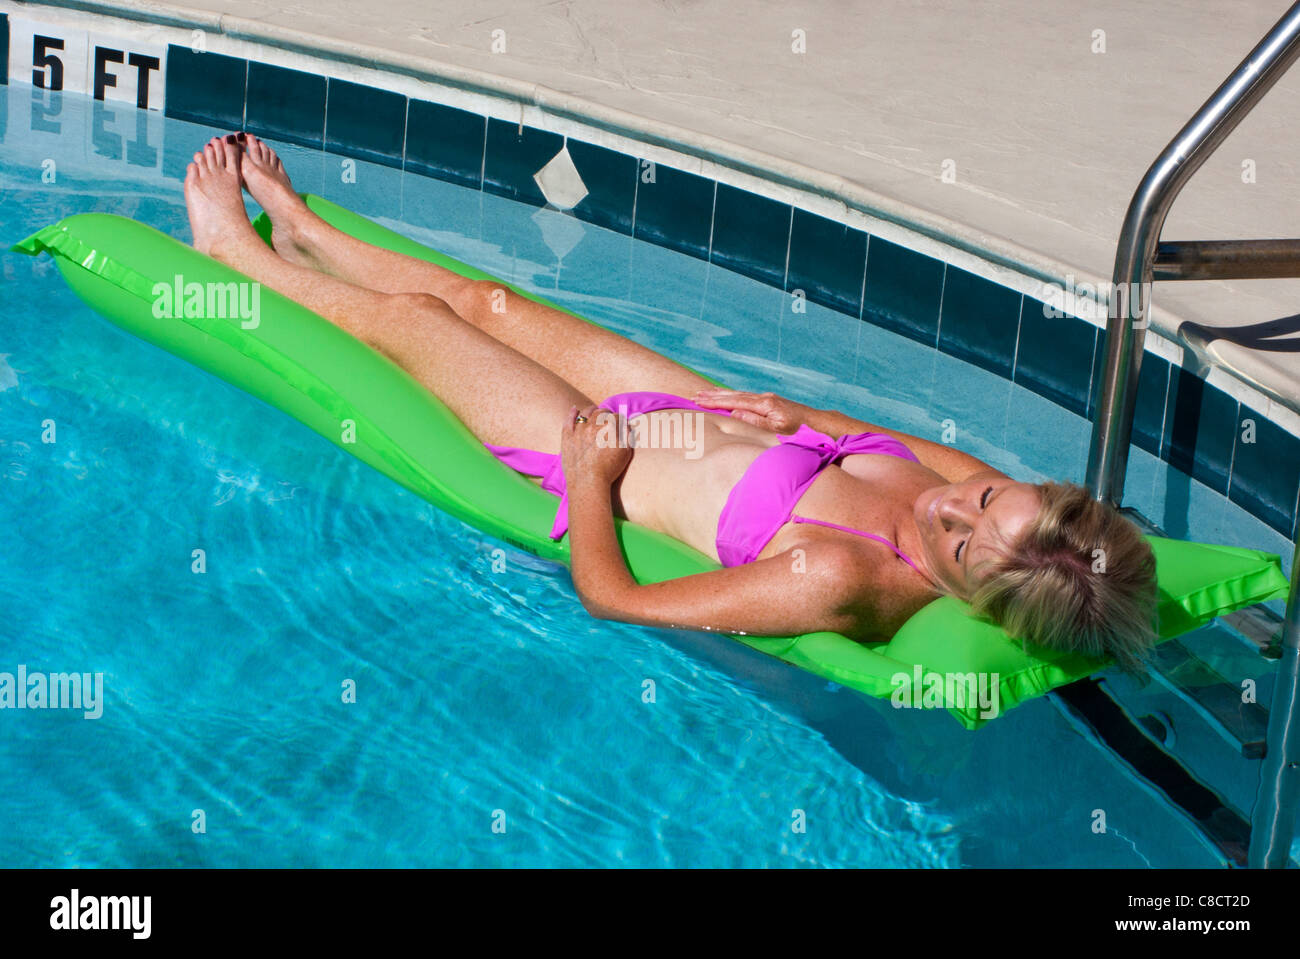 woman sunbathing on a lilo at the edge of a swimming pool. Stock Photo